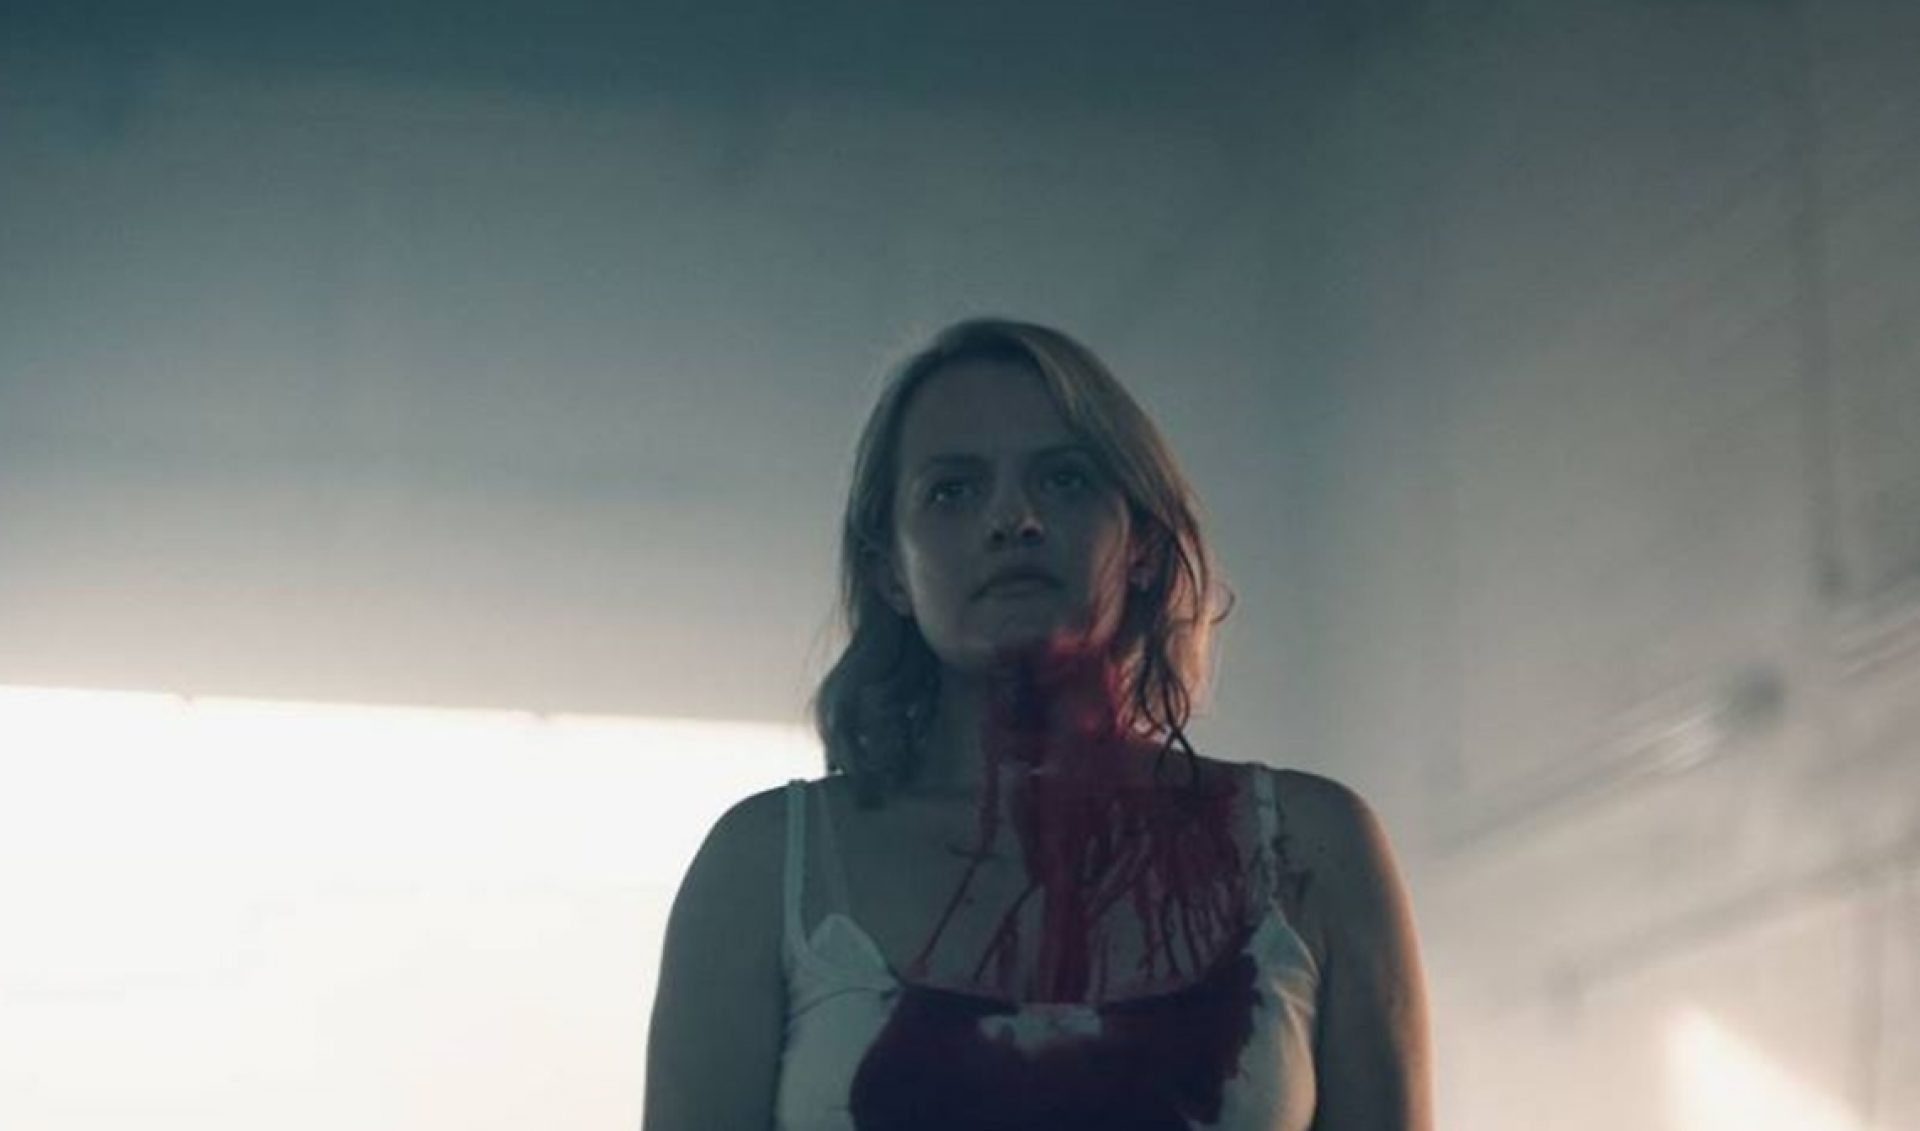 Hulu Offers Glimpse At Second Season Of ‘The Handmaid’s Tale’, Bowing In April